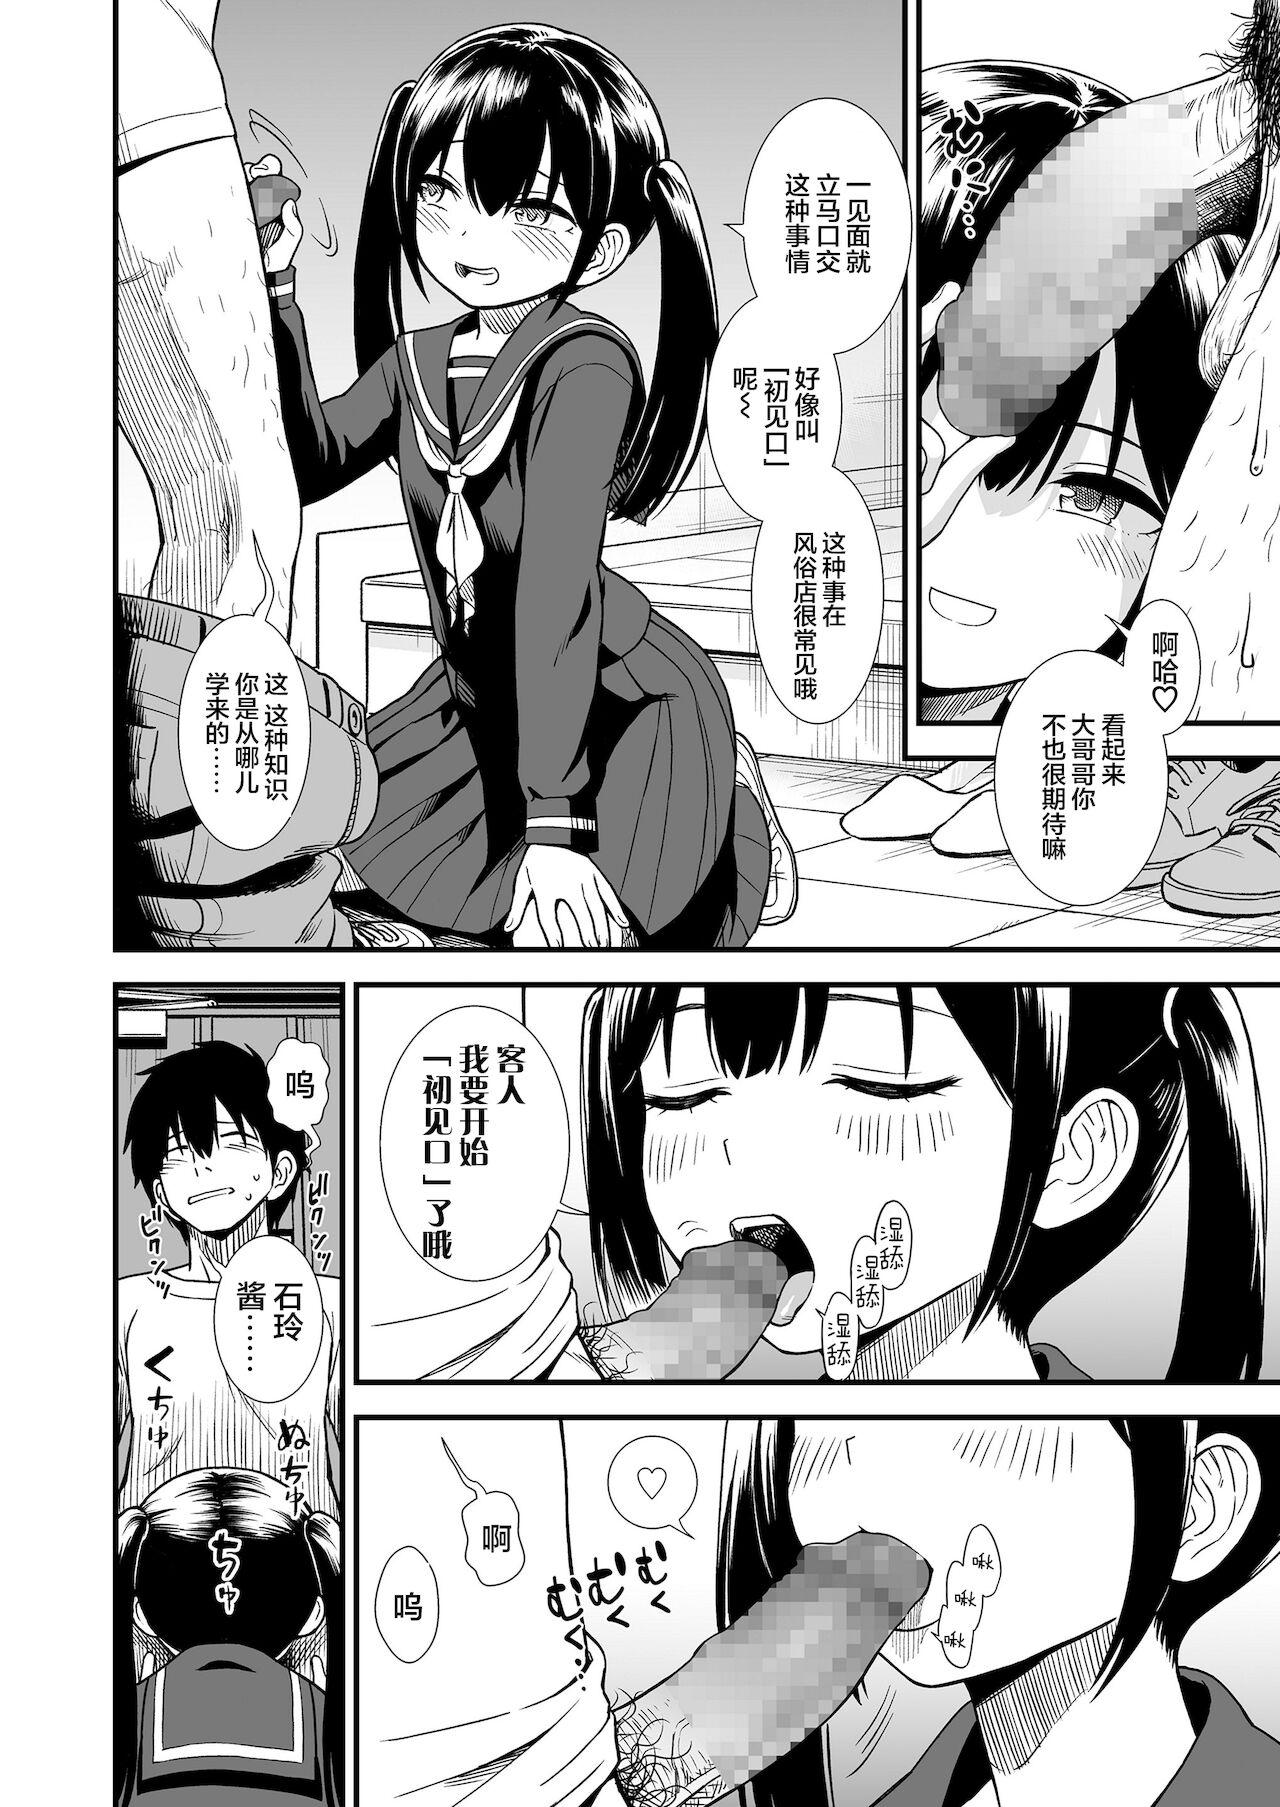 Married Imouto no Tomodachi Homecoming | 妹妹的朋友 Homecoming Doctor - Page 5